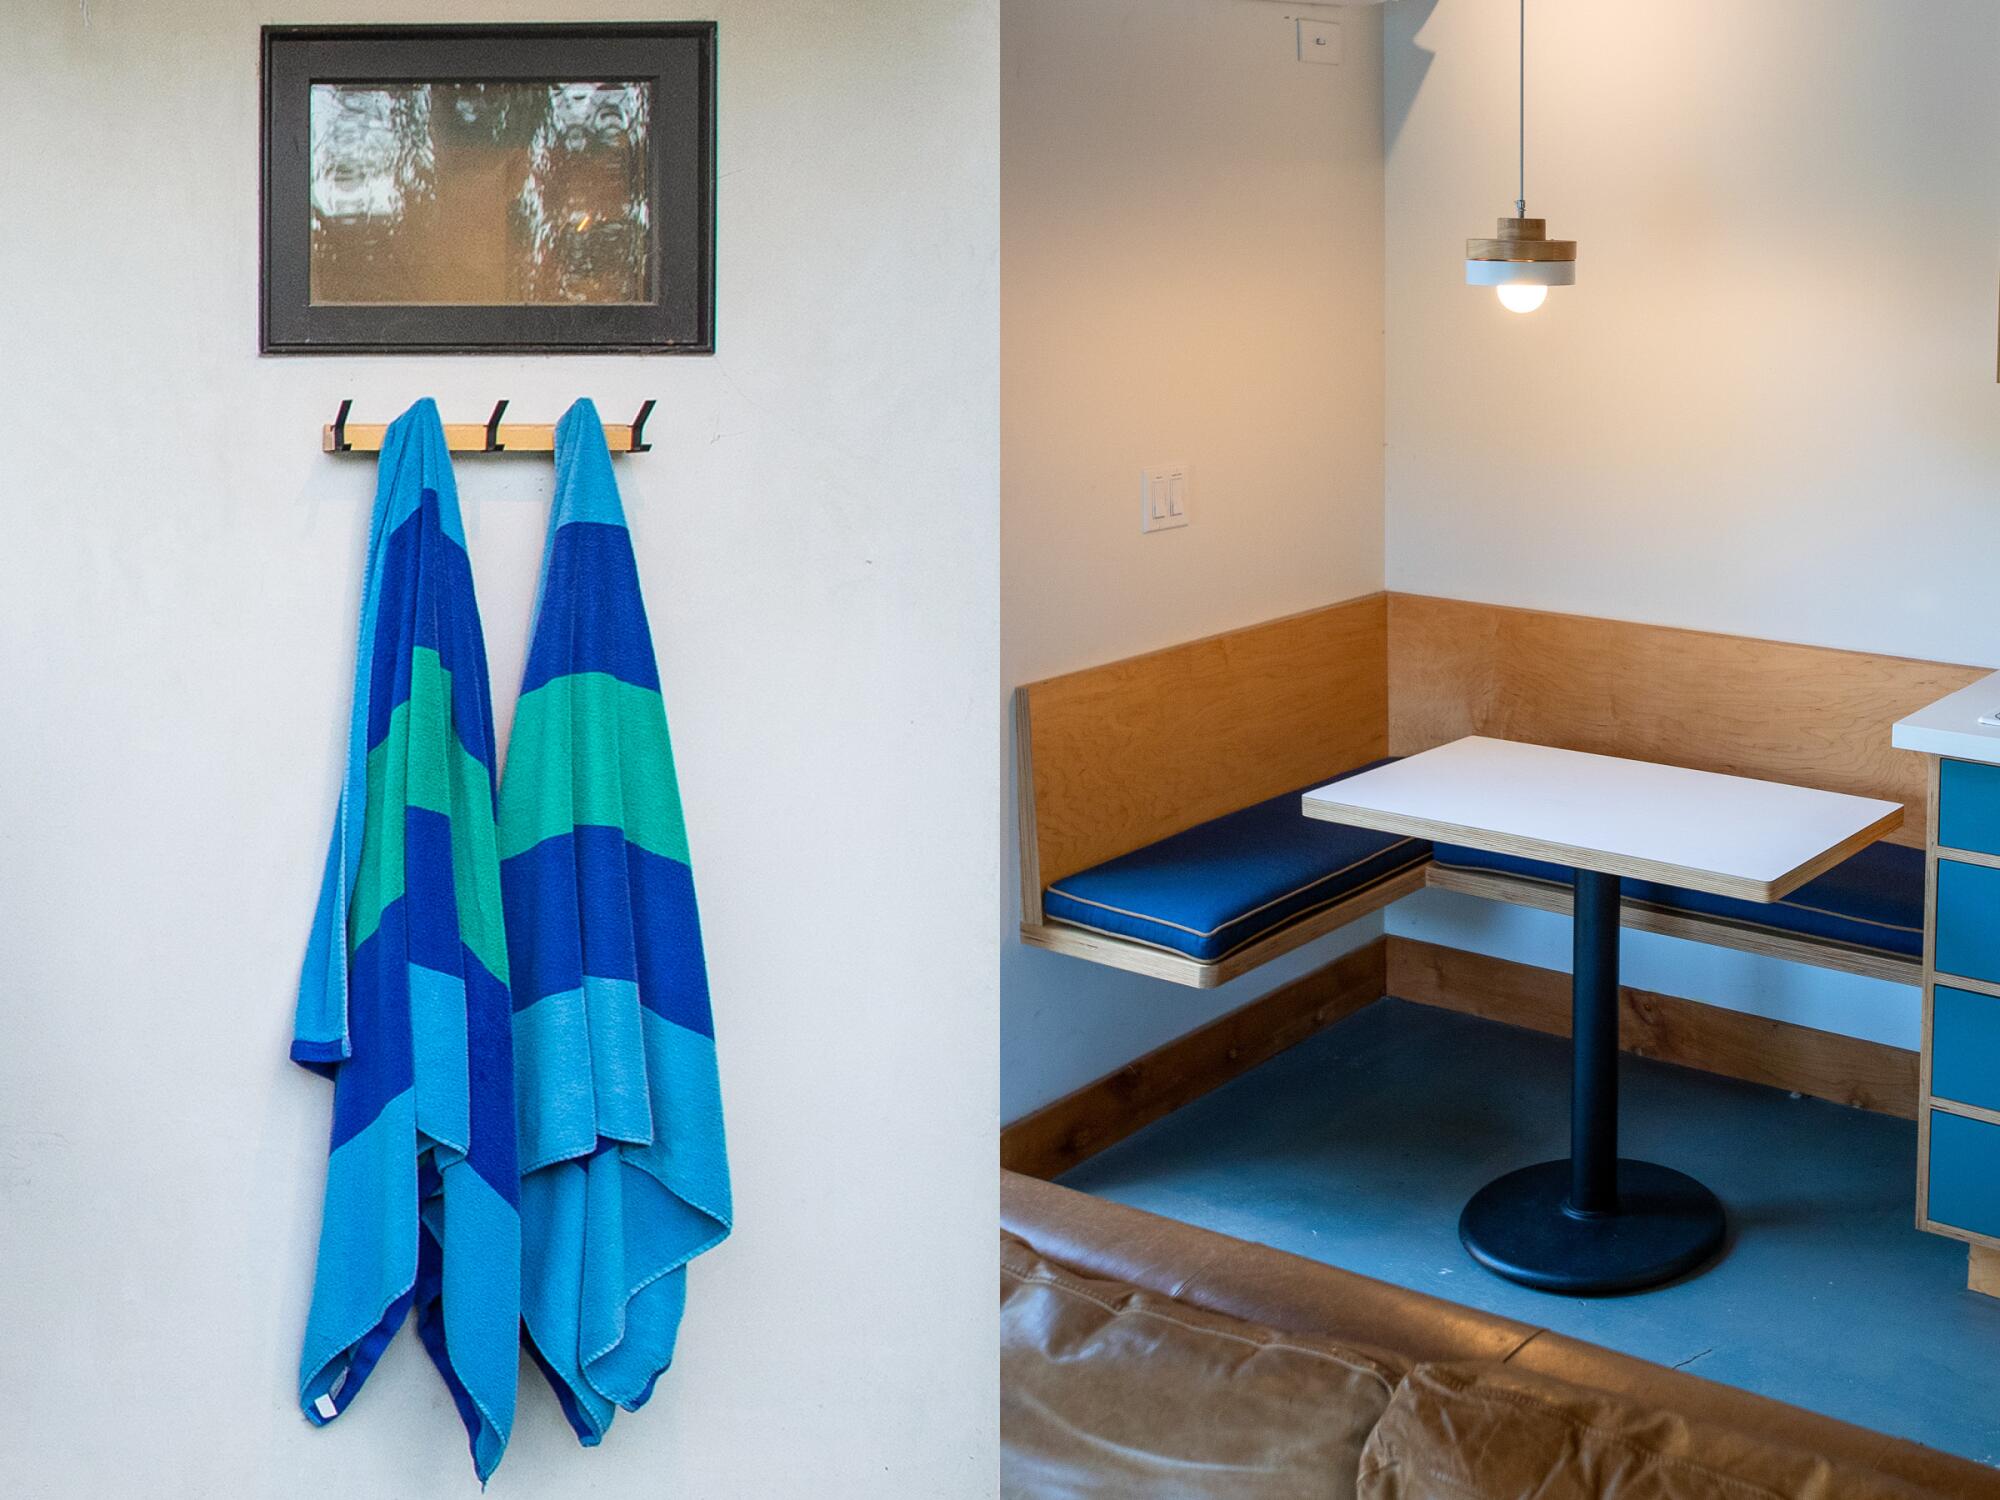 Towels hanging on wall hooks under a framed photograph, left; a small corner dining nook